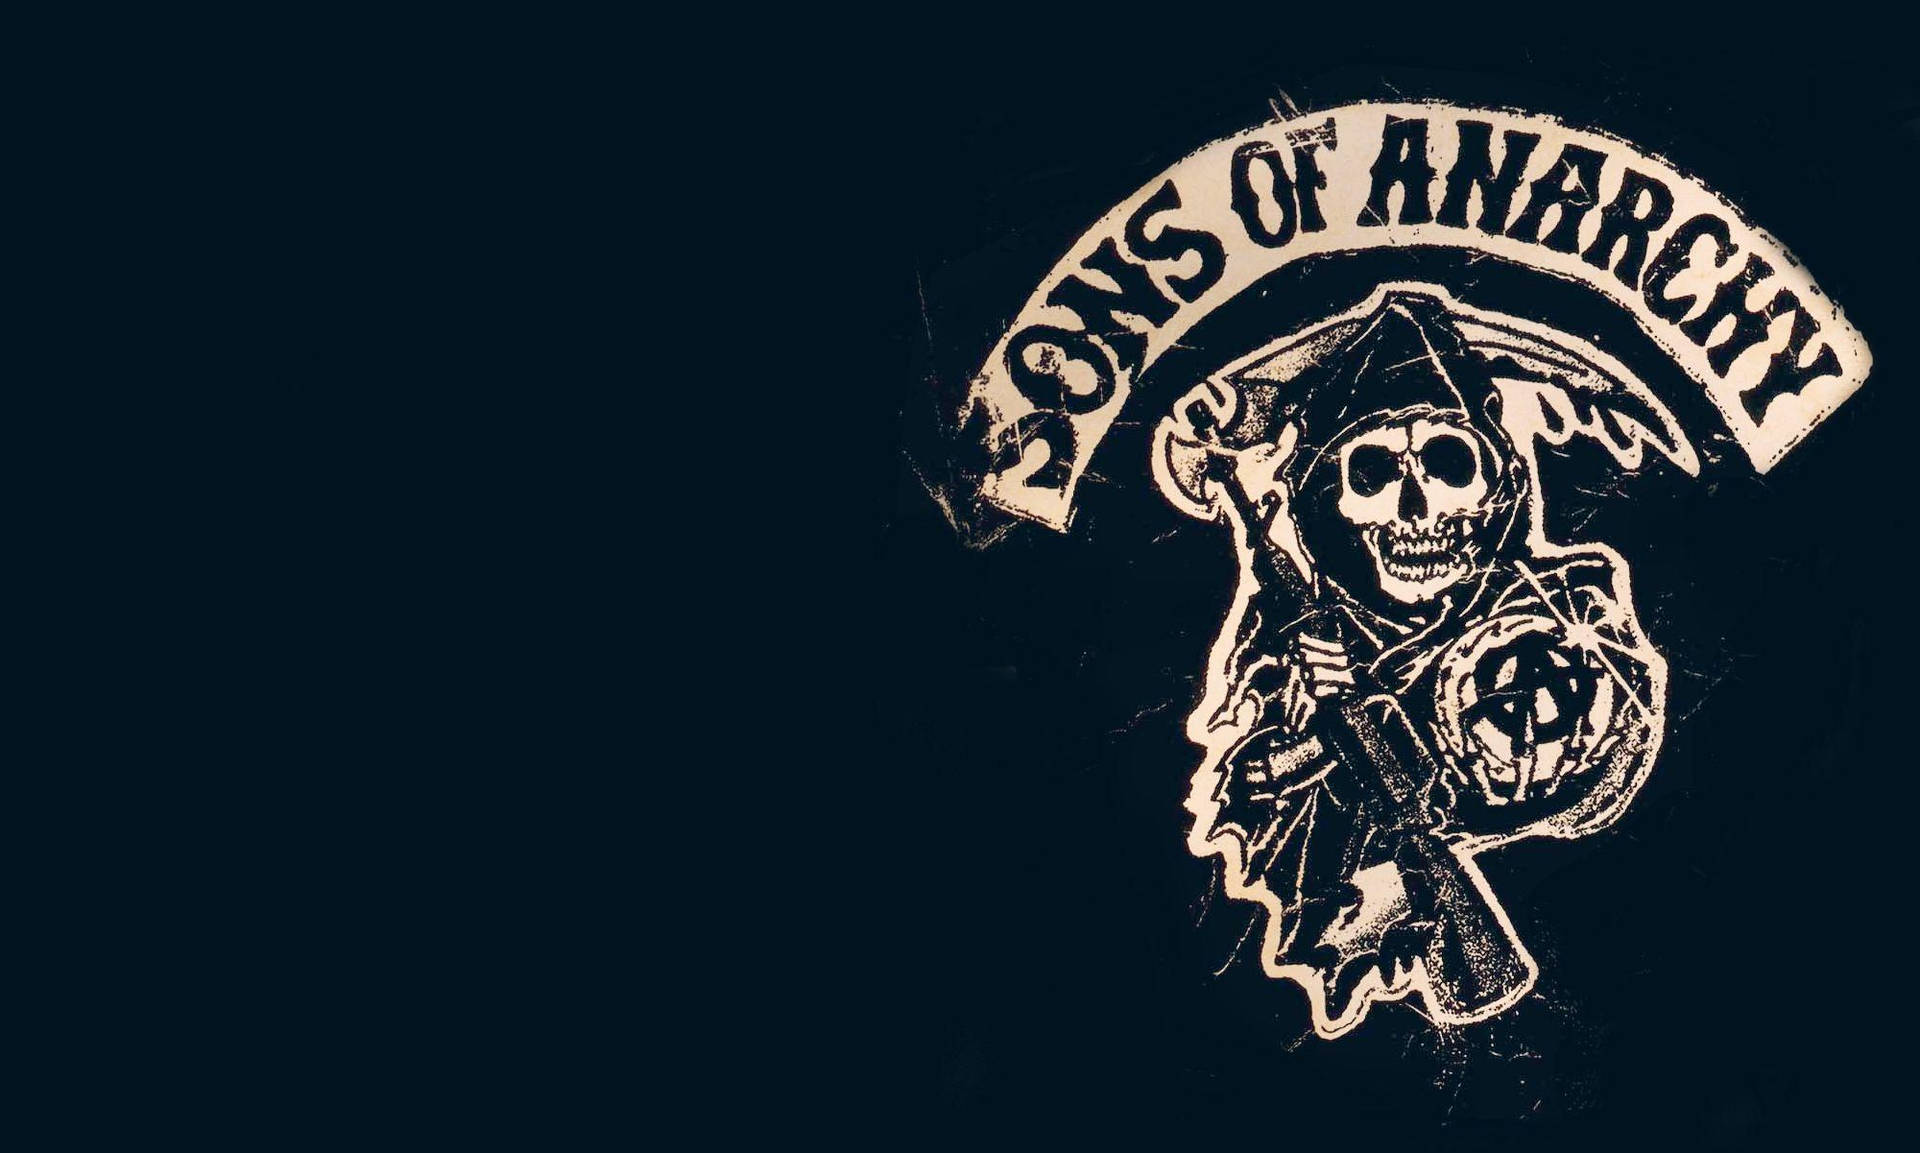 The Burgeoning Idealism Of Sons Of Anarchy Background